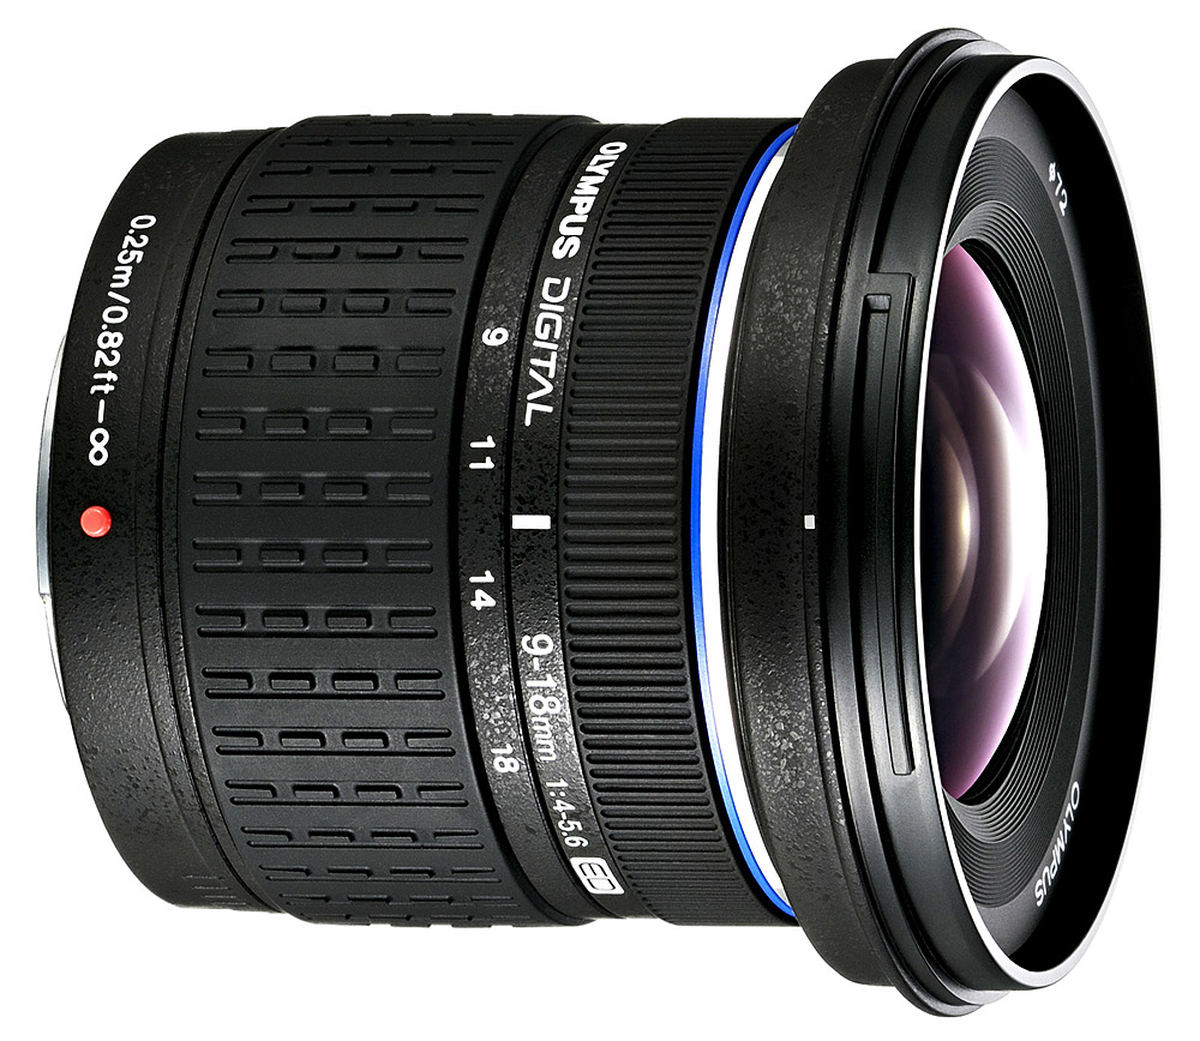 Olympus Zuiko Digital ED 9-18mm f/4.0-5.6 : Specifications and Opinions |  JuzaPhoto